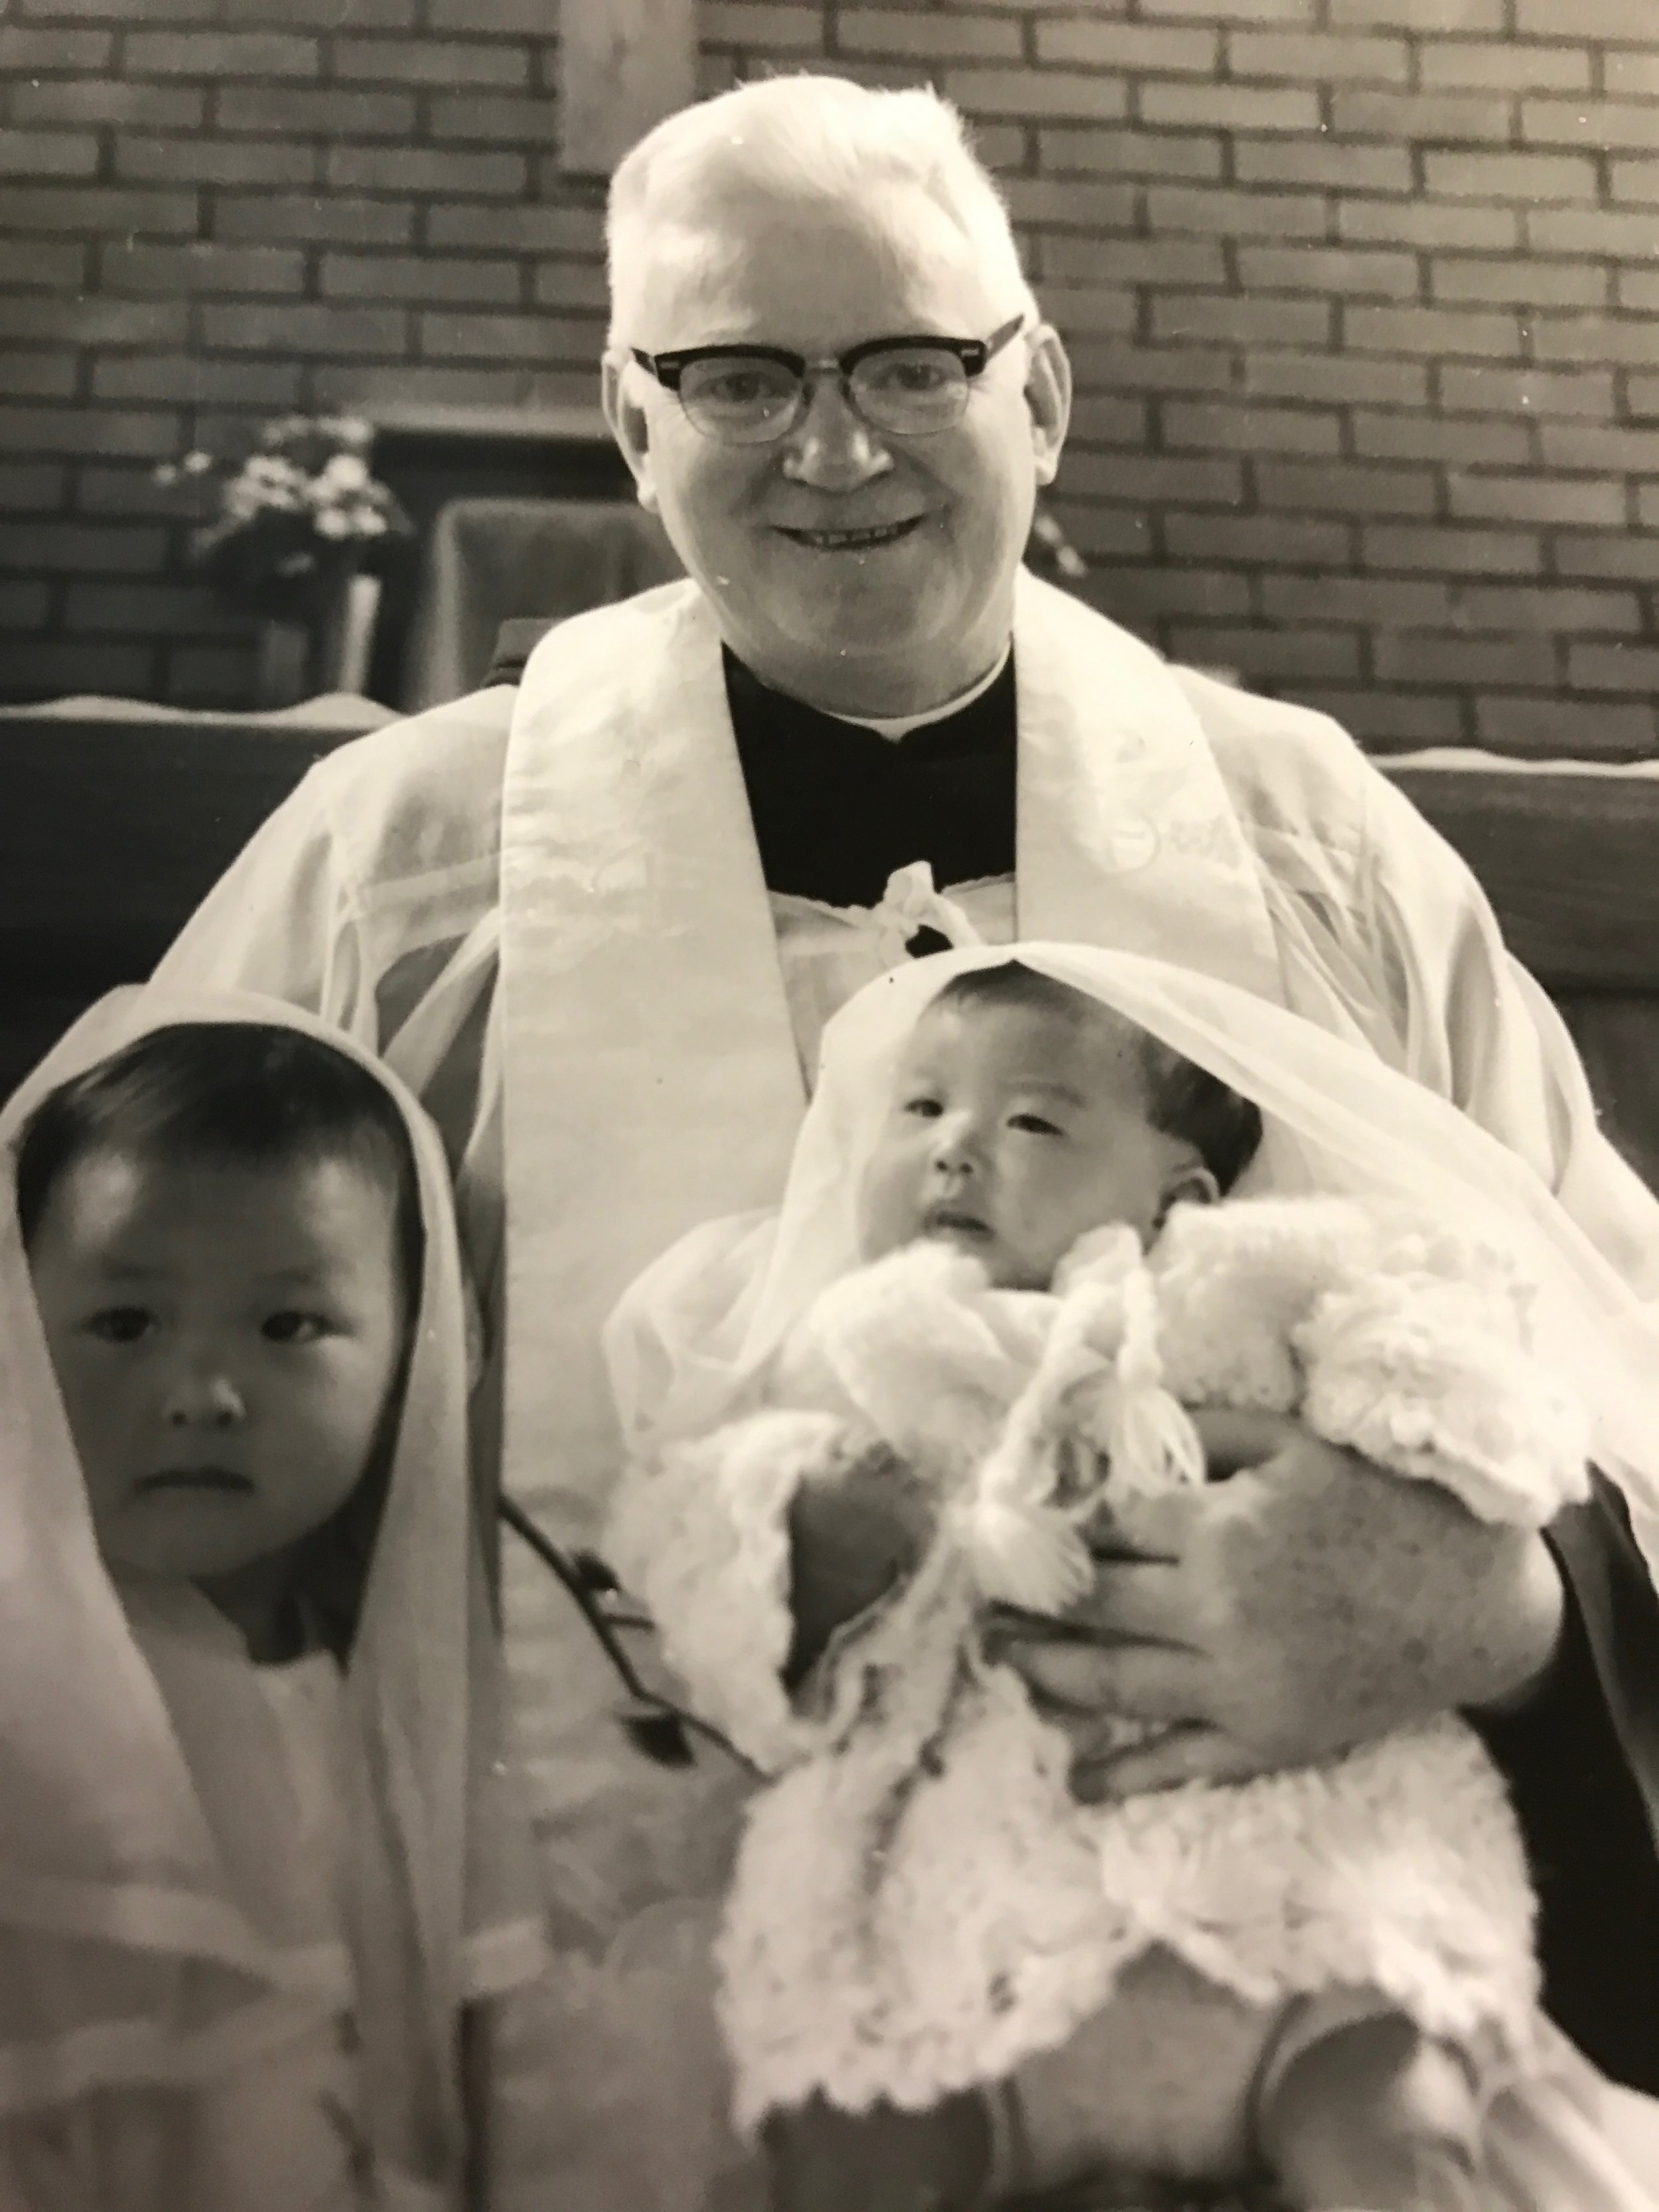 Father Purcell baptized many children and was a beloved presence who is still remembered today